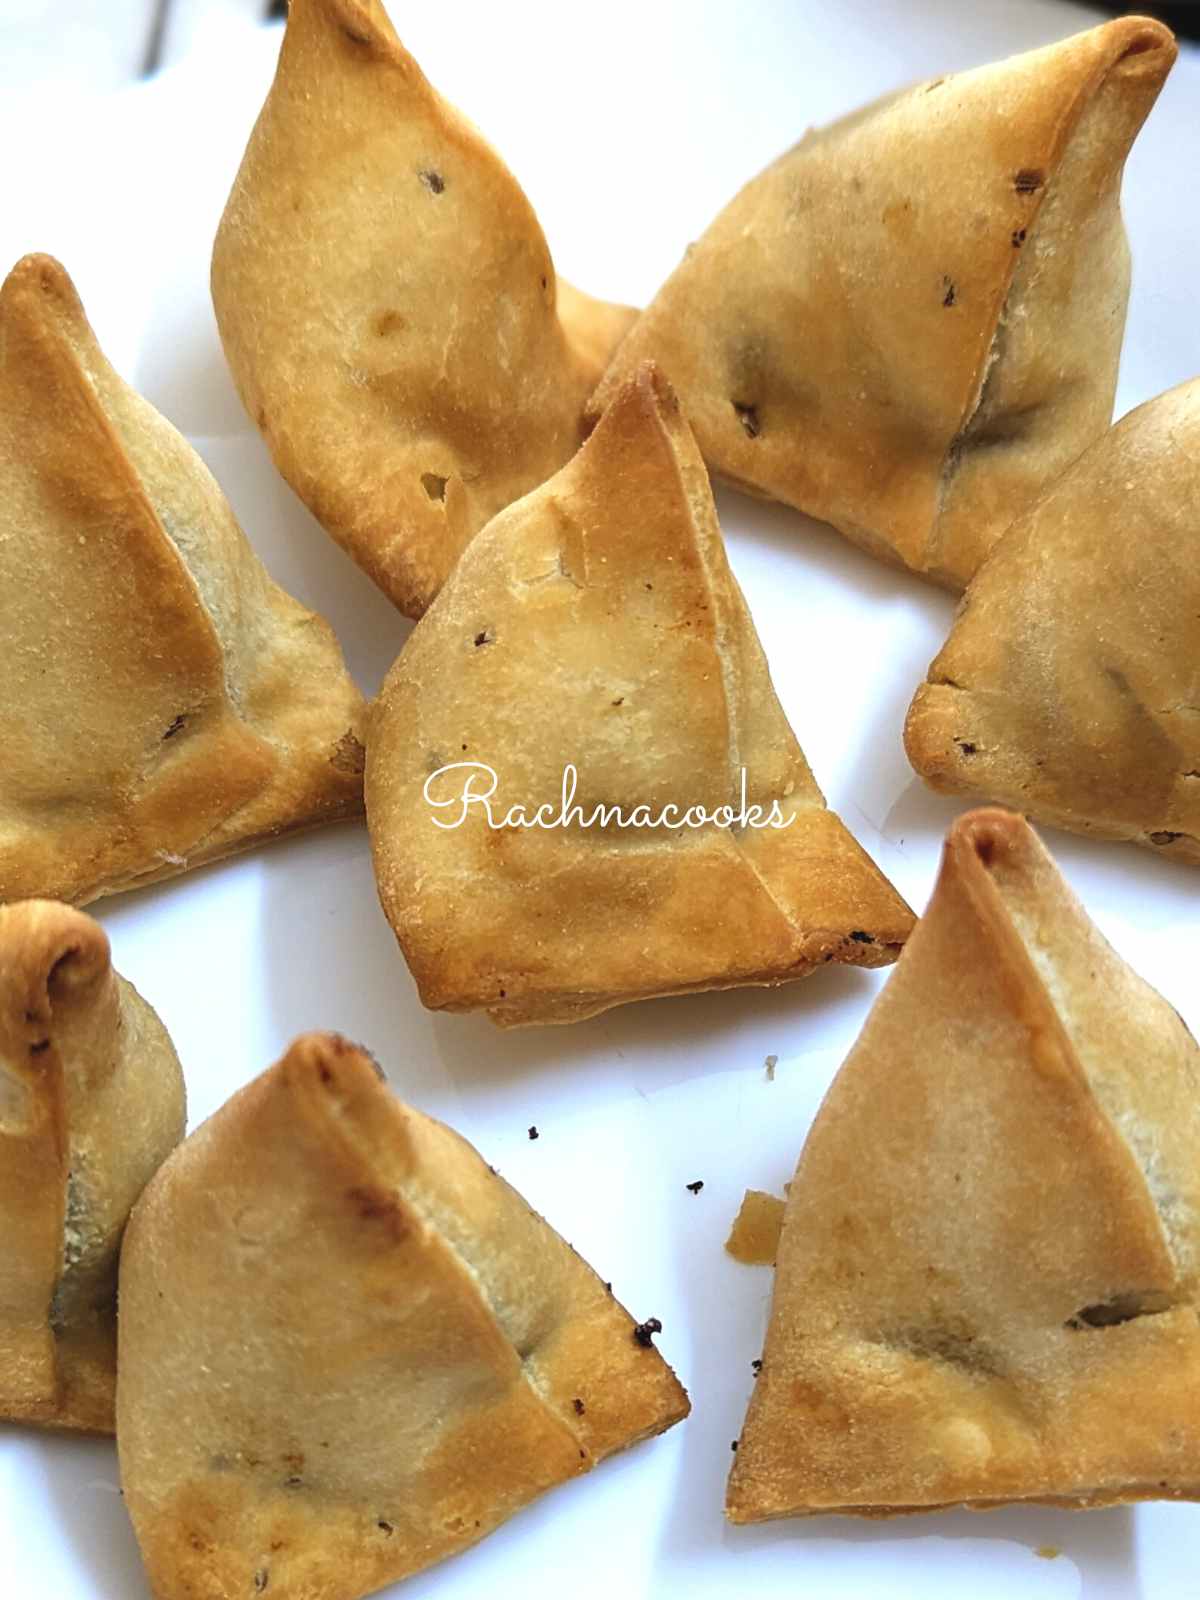 Air fried frozen samosas served on a white plate.